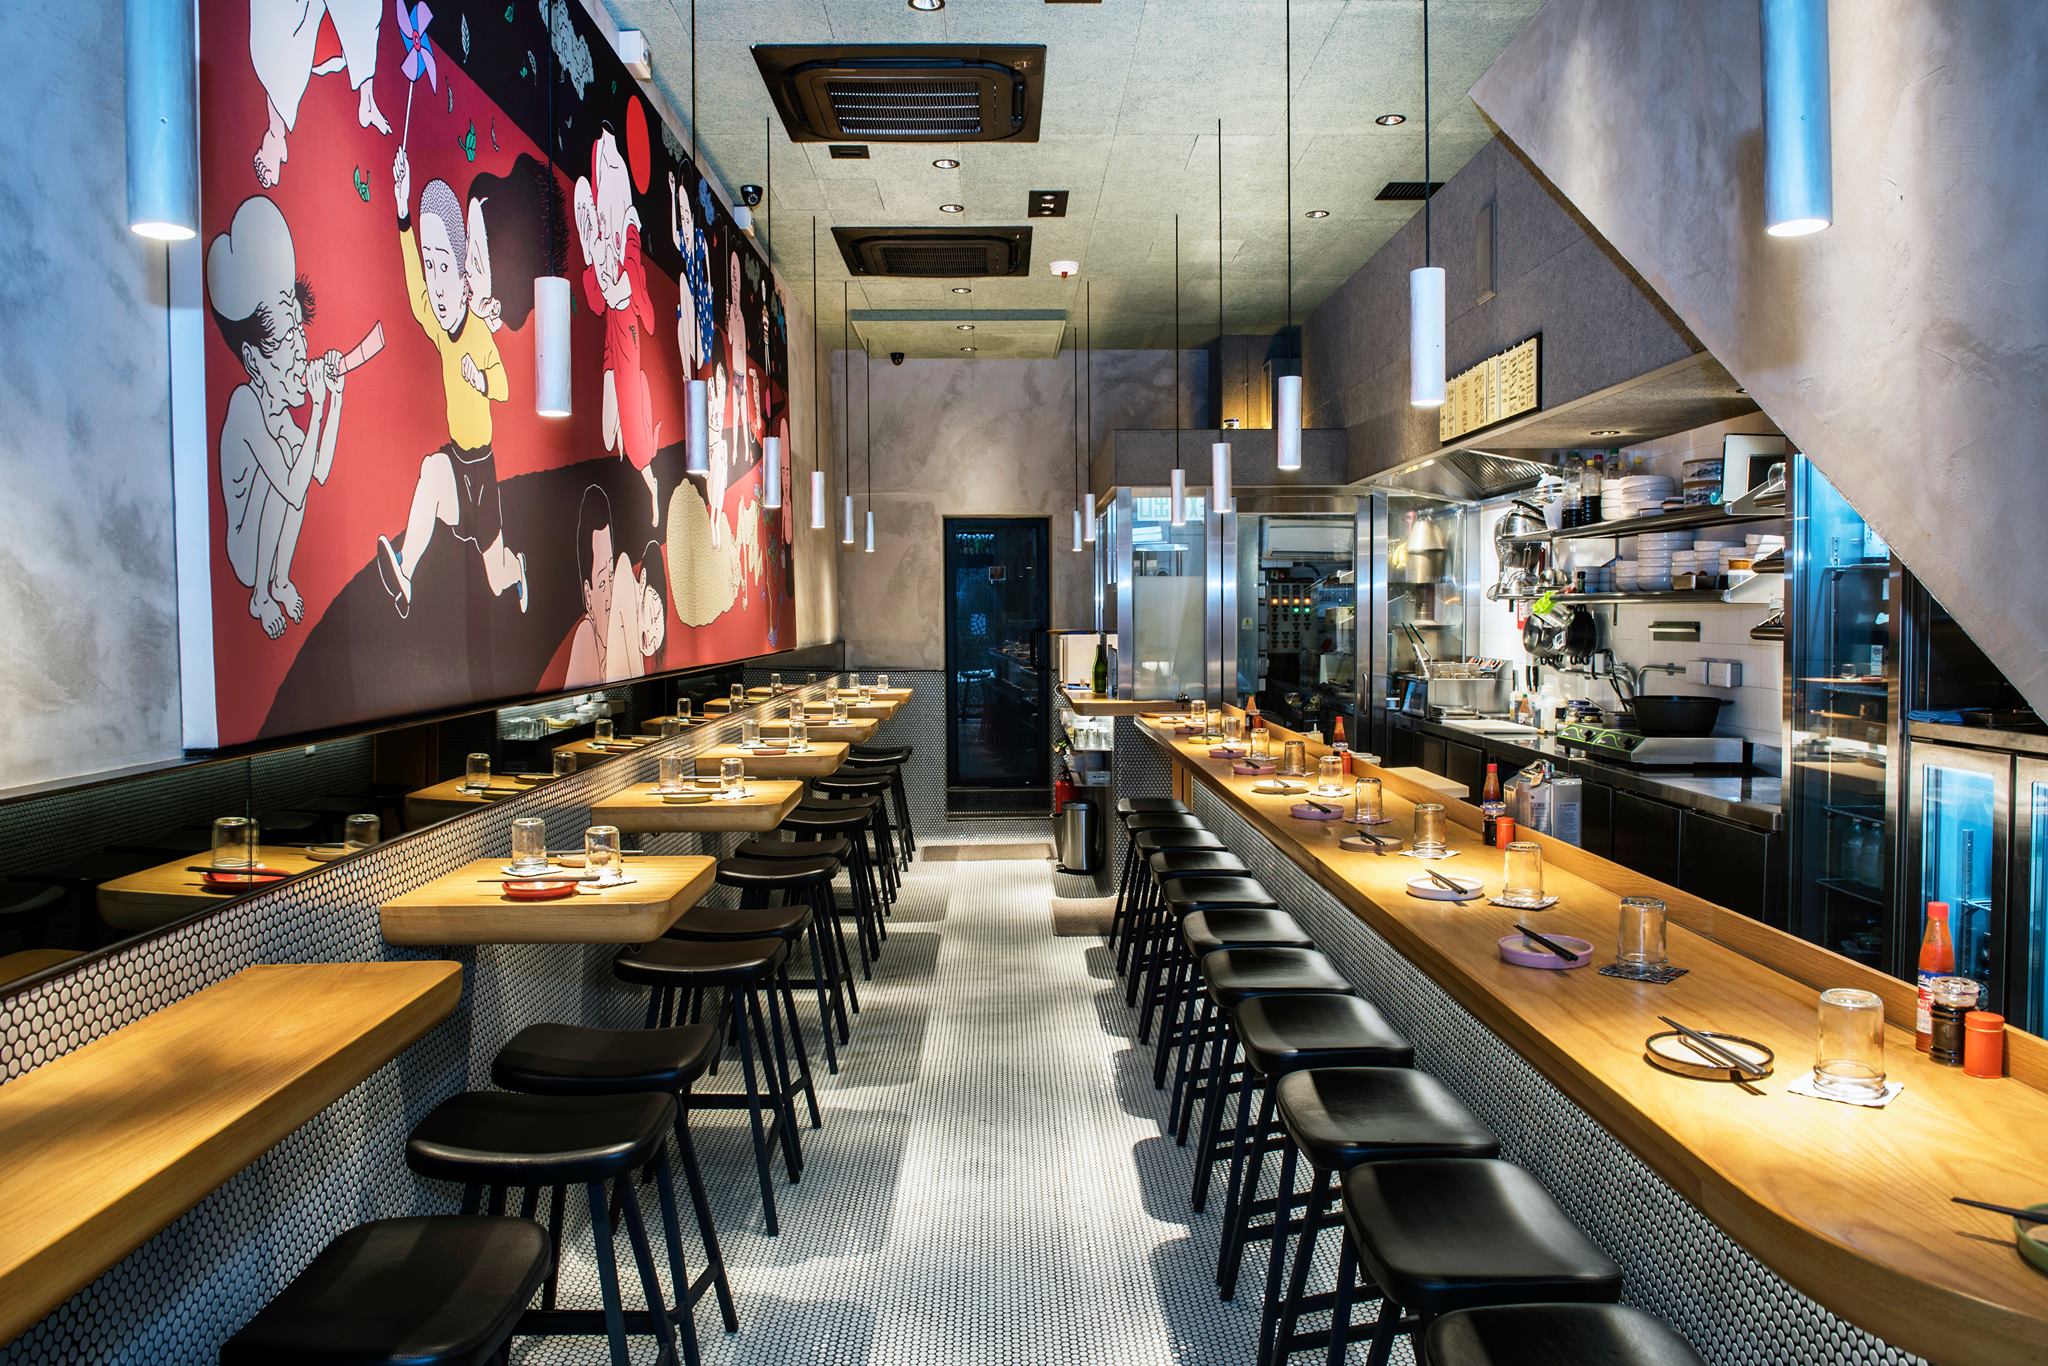 okra hong kong interior architecture and design by sean dix